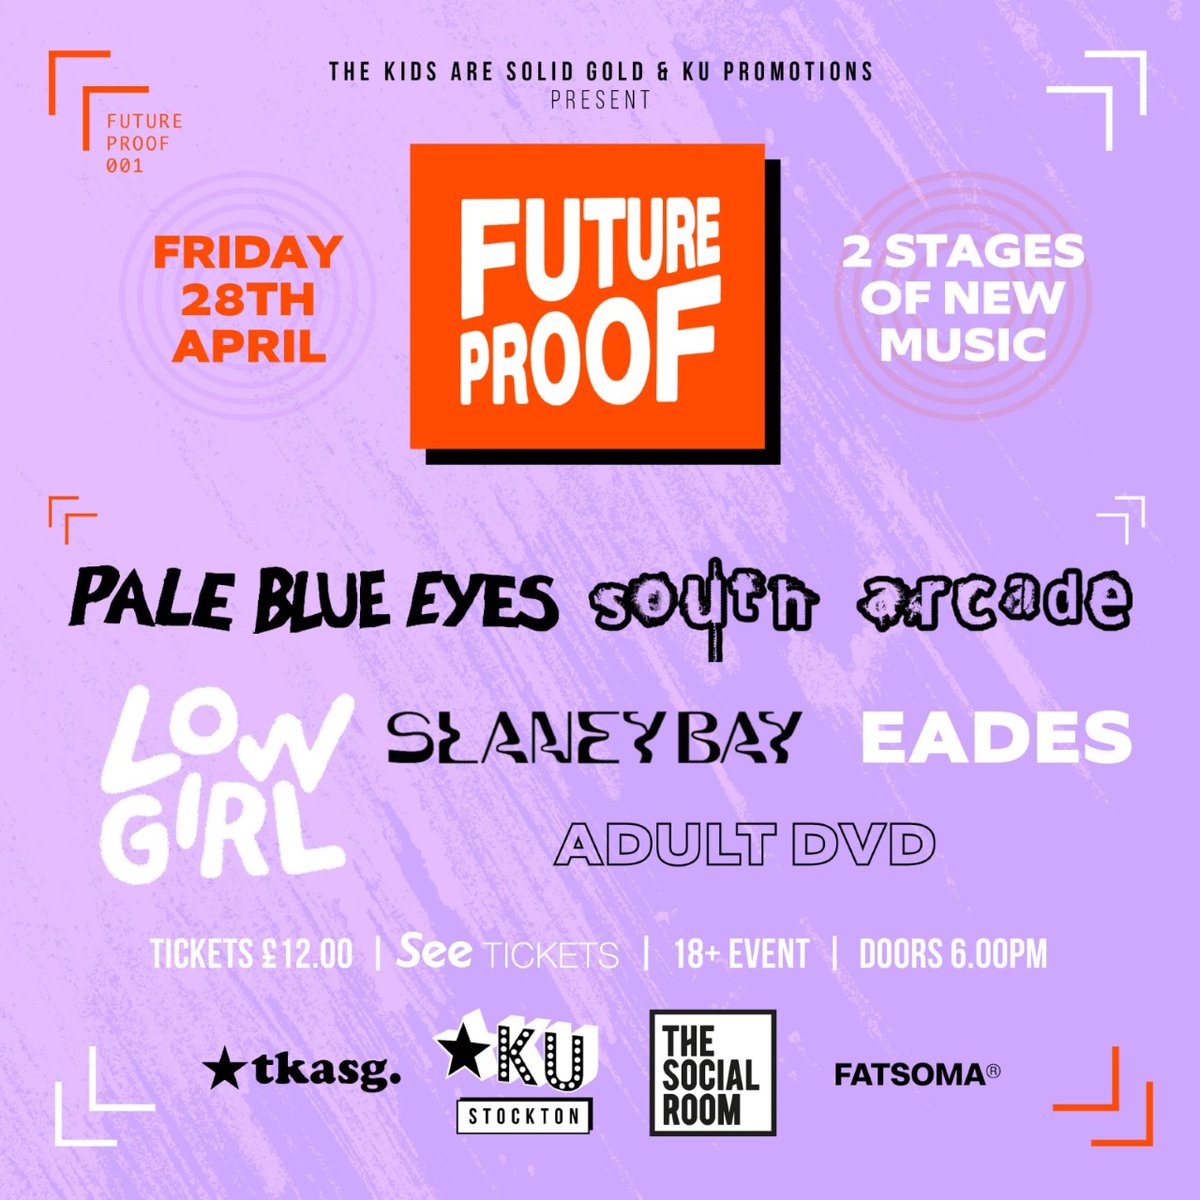 Next up: We're back in Stockton at @ku_stockton & @SocialStockton on Friday 28 April for Future Proof, our ace new co-promo with @jimmyjukebox. Two stages showcasing 6 of the most exciting new acts around. Listen here: open.spotify.com/playlist/5kq6p… Tix: fatsoma.com/e/q9e6wfm8/fut…